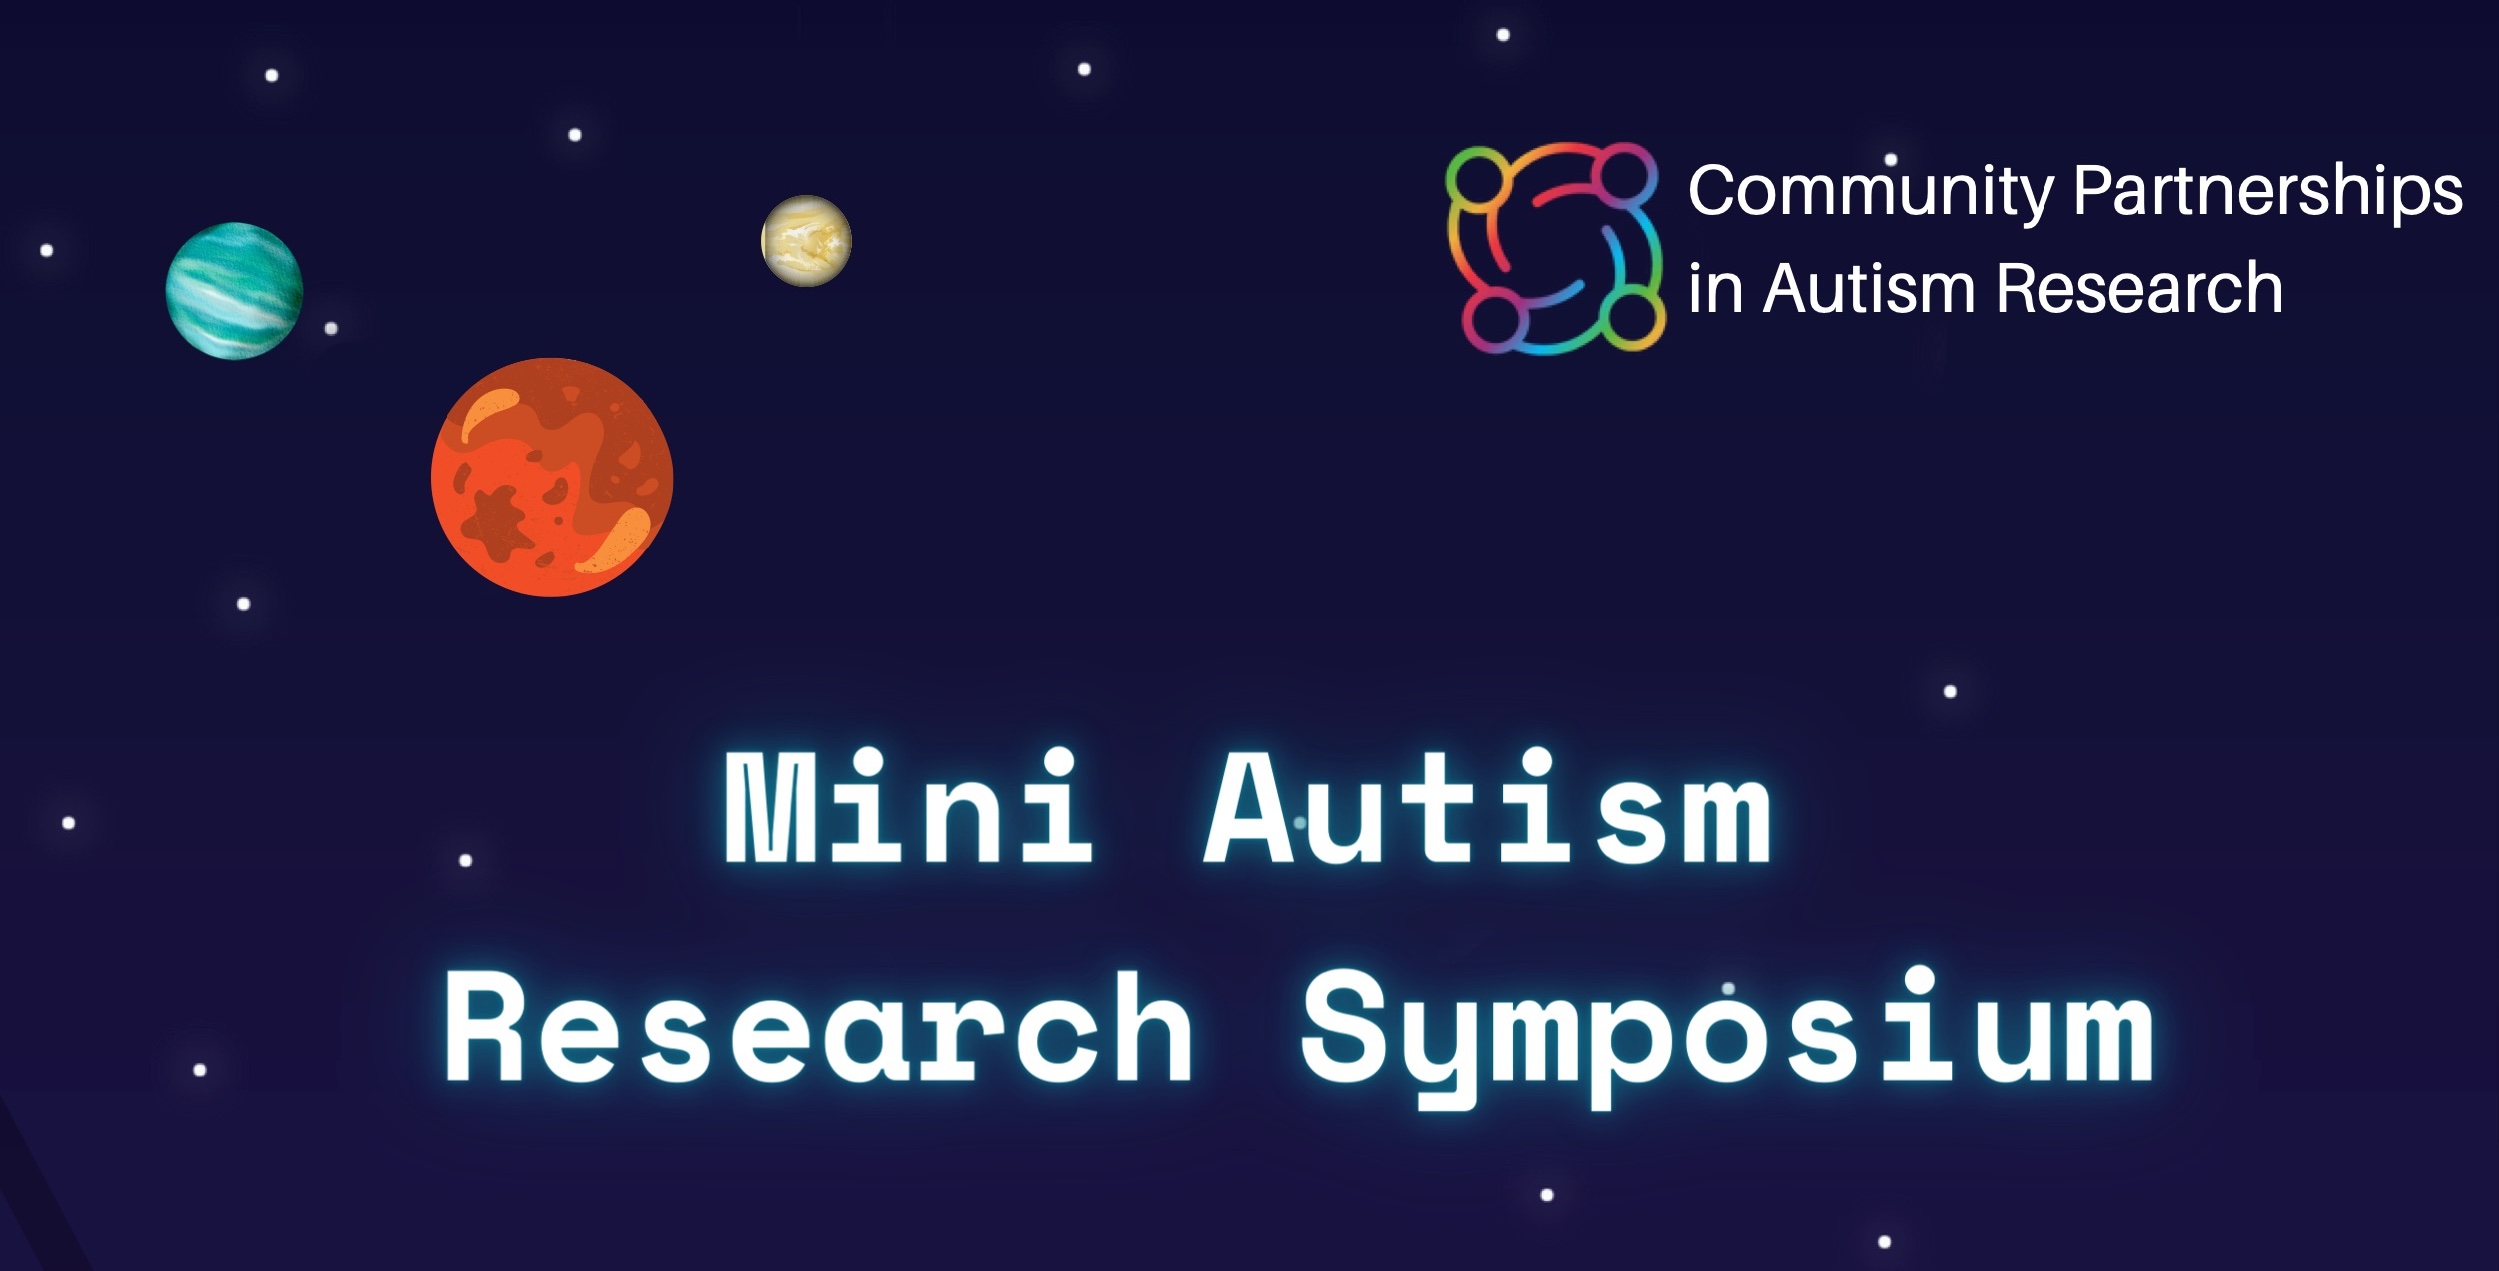 Comic galaxy with planets and stars. Text: Mini Autism Research Symposium.